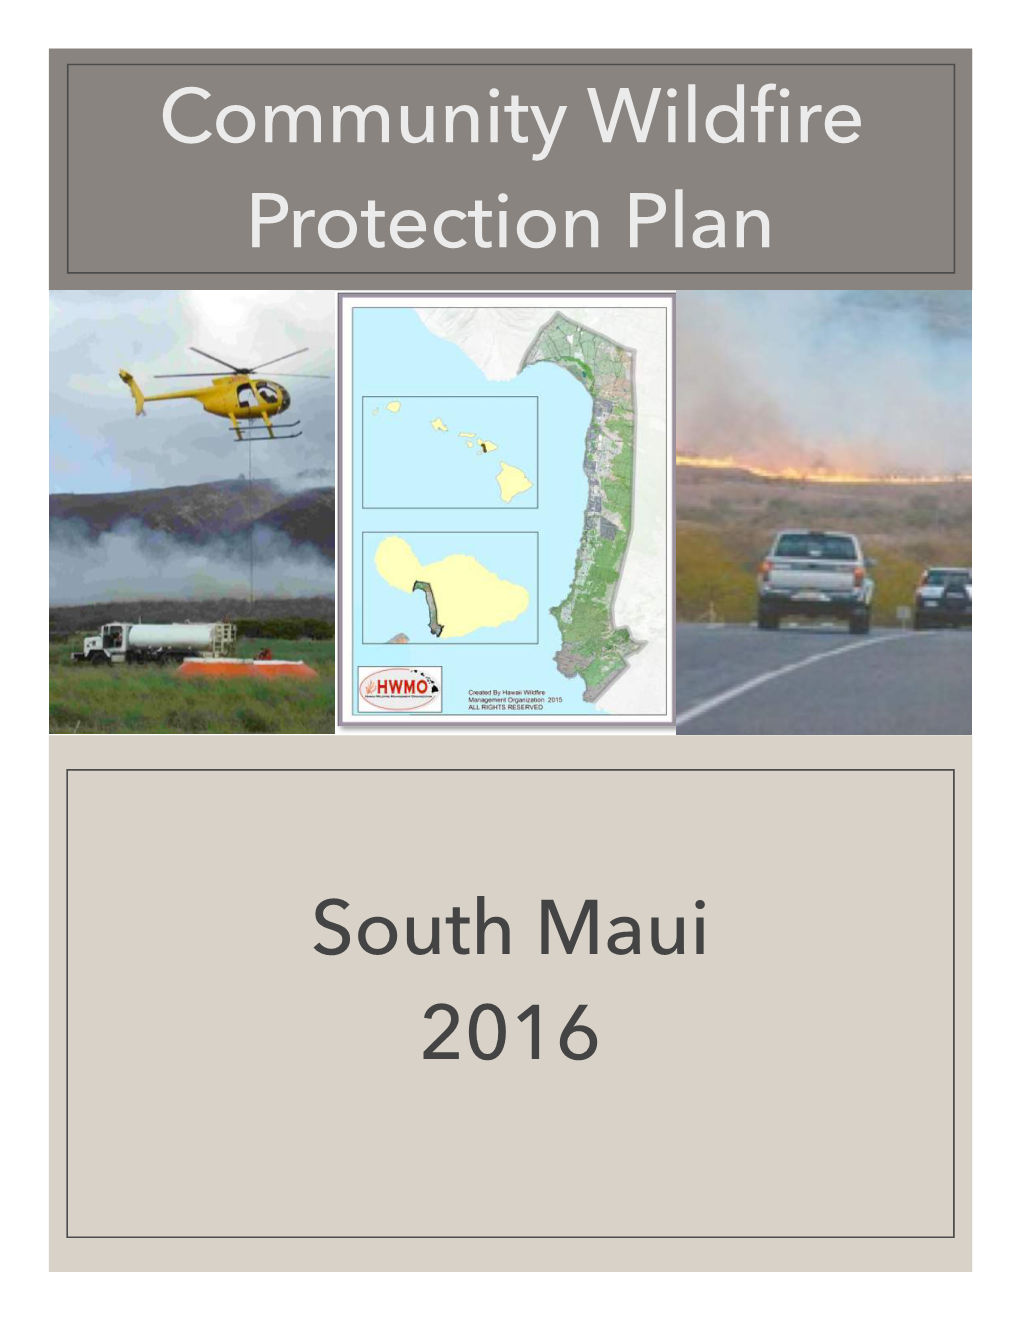 Community Wildfire Protection Plan South Maui 2016